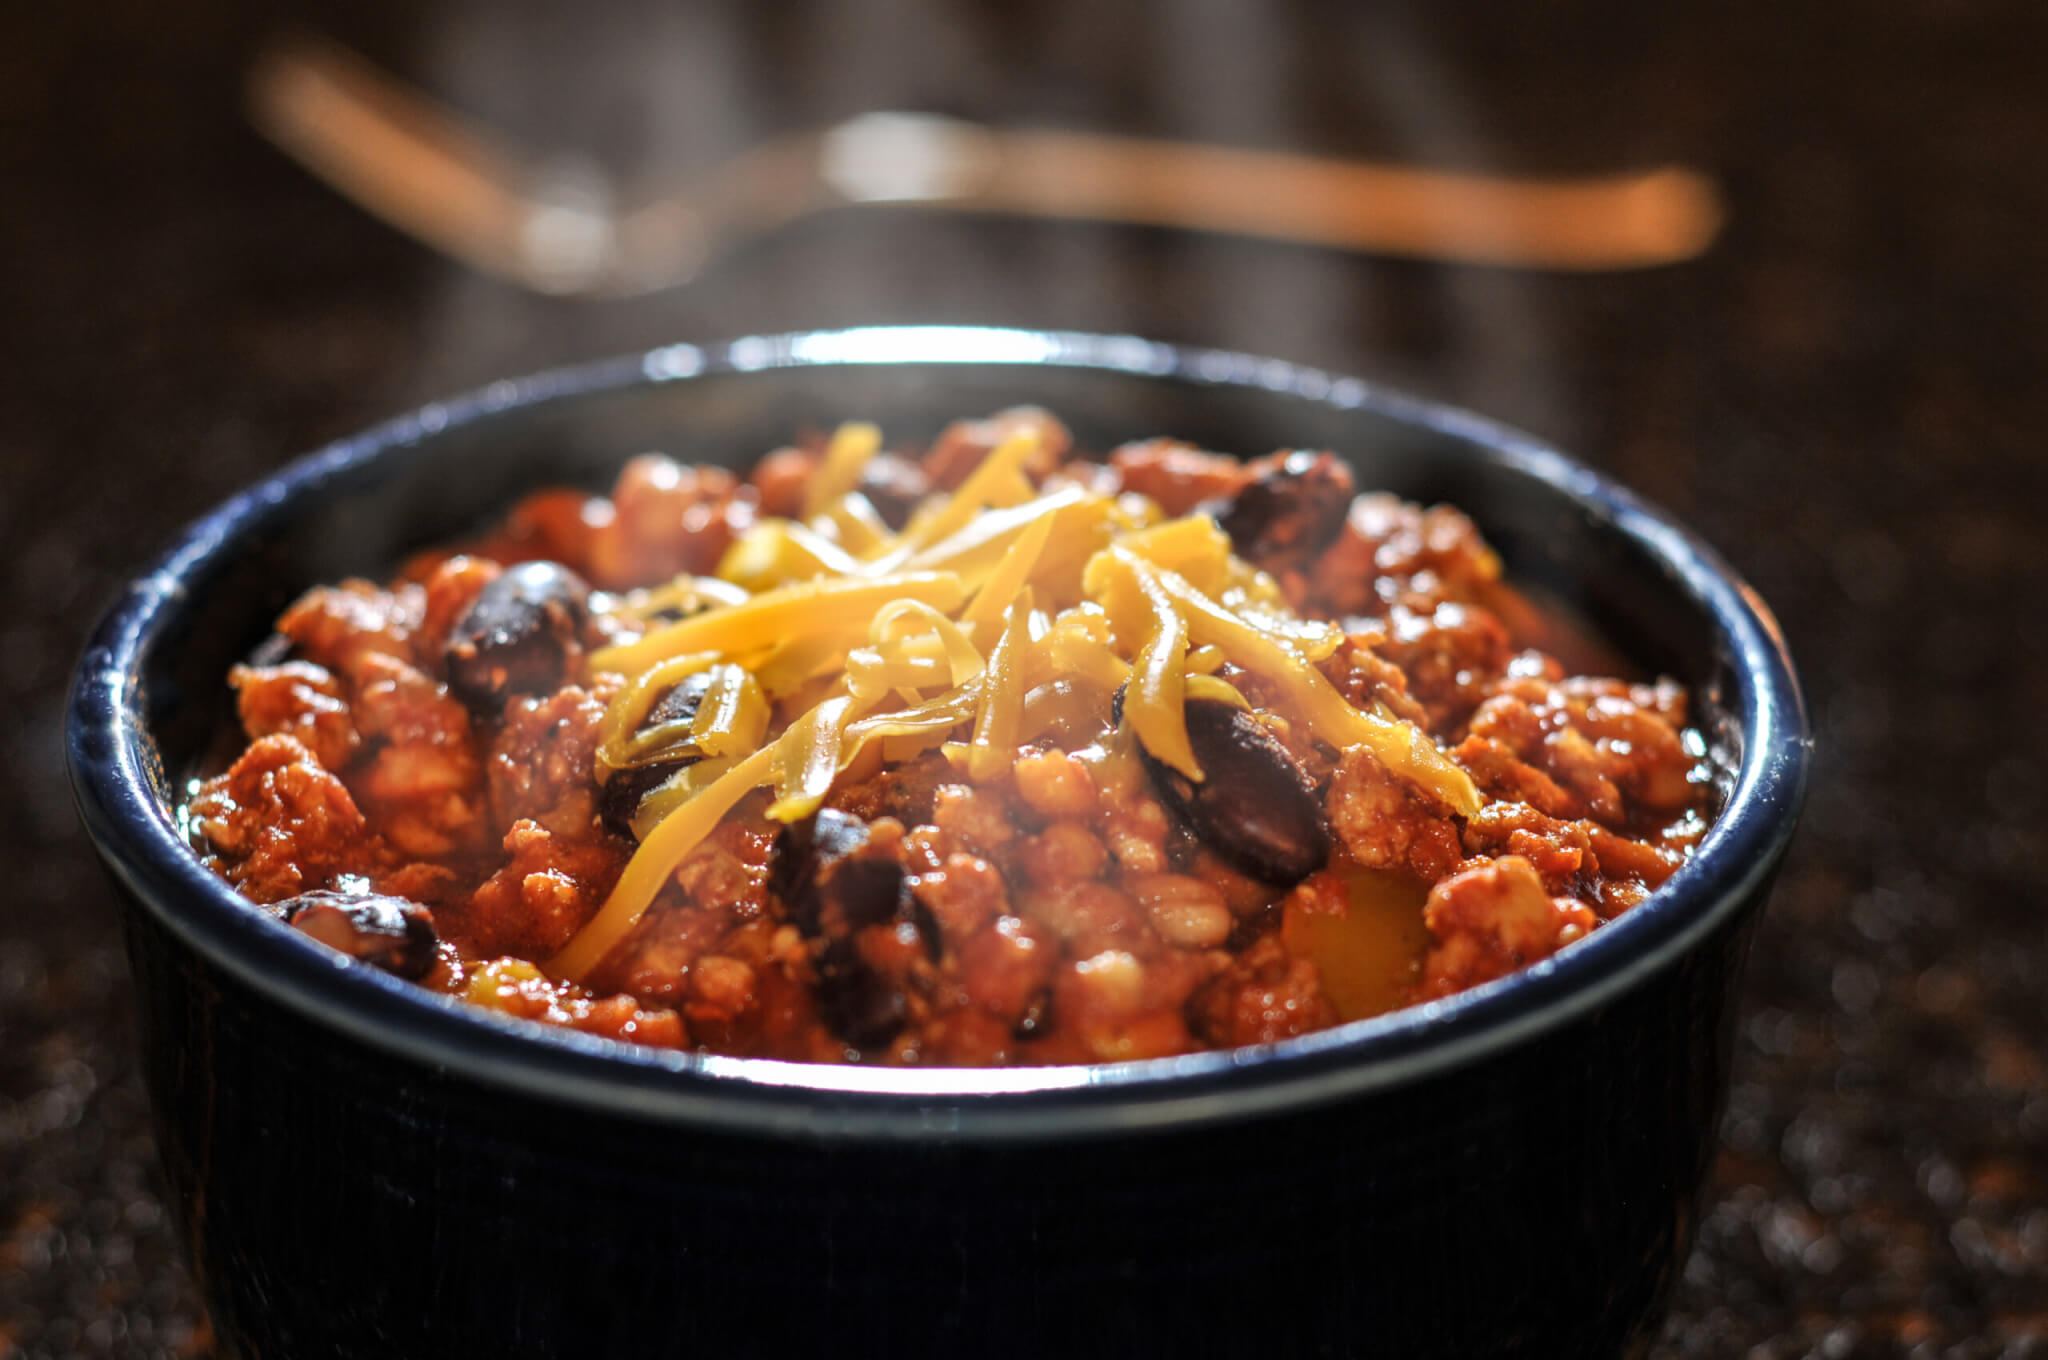 A bowl of chili